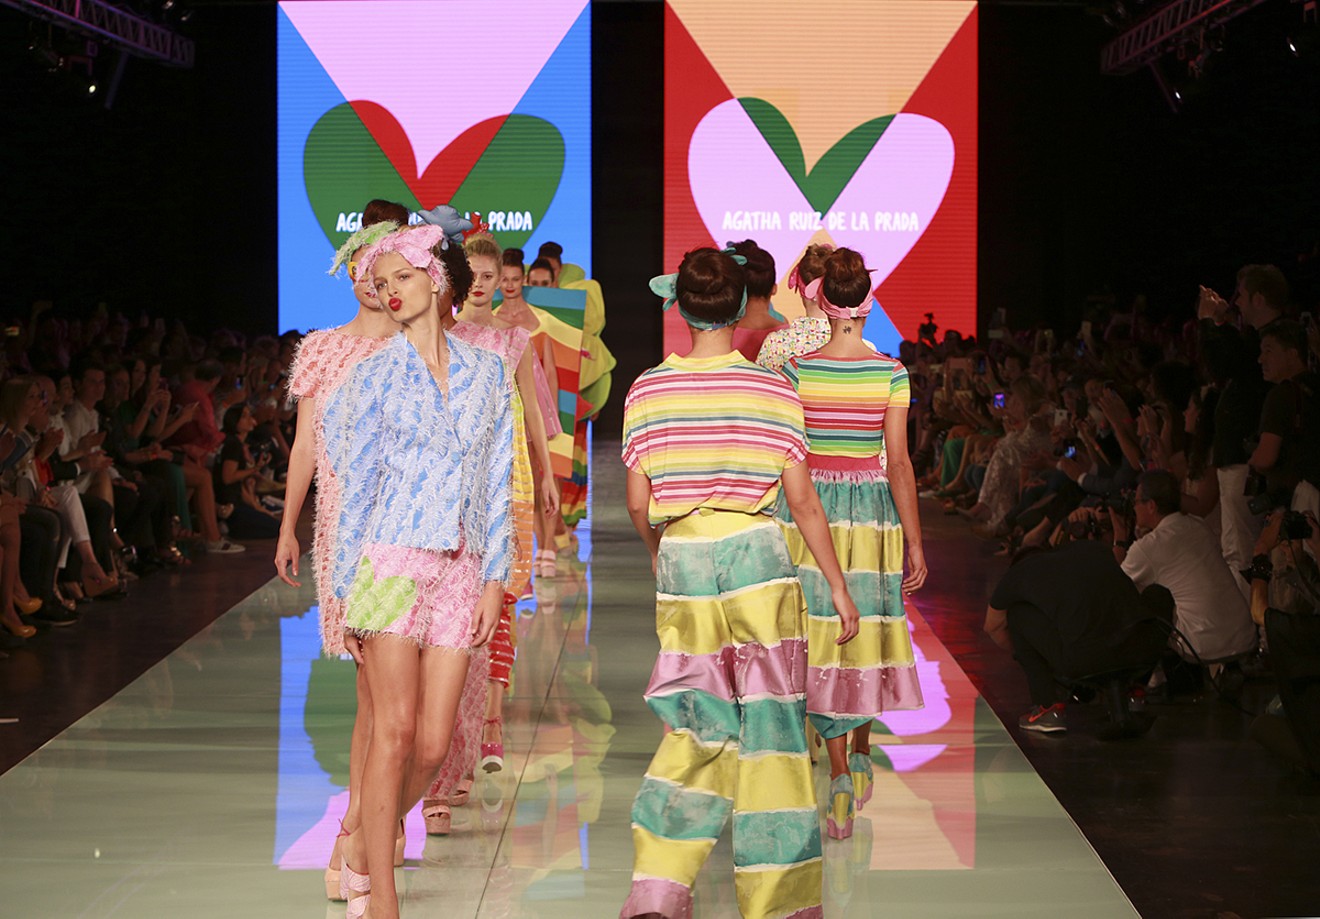 Miami Fashion Week could be a complement to New York Fashion Week.